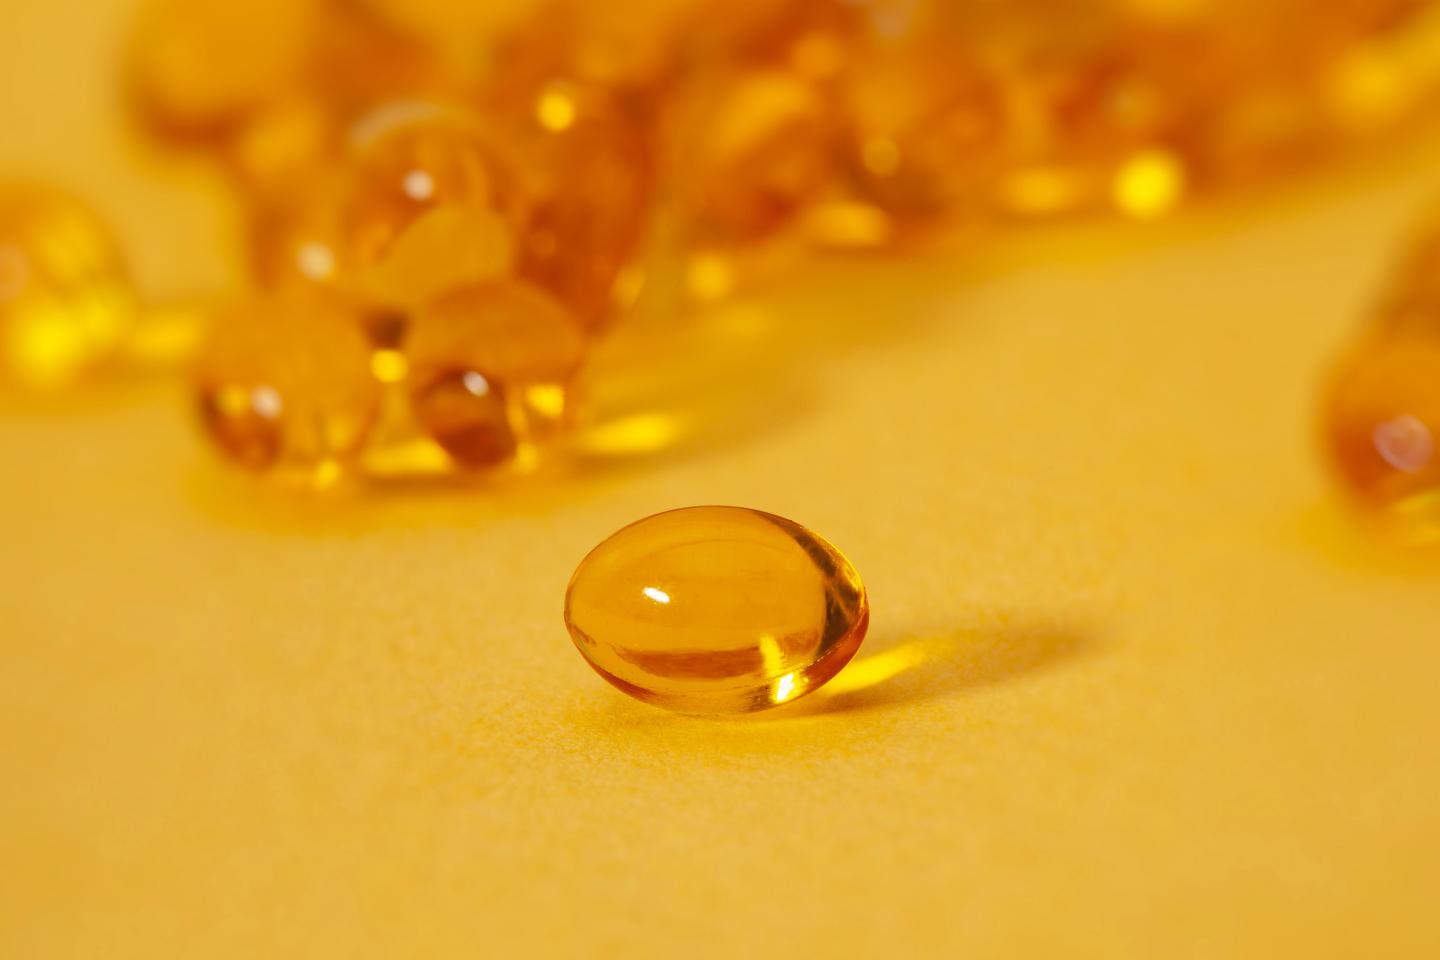 Vitamin D deficiency does not increase risk of type 1 diabetes